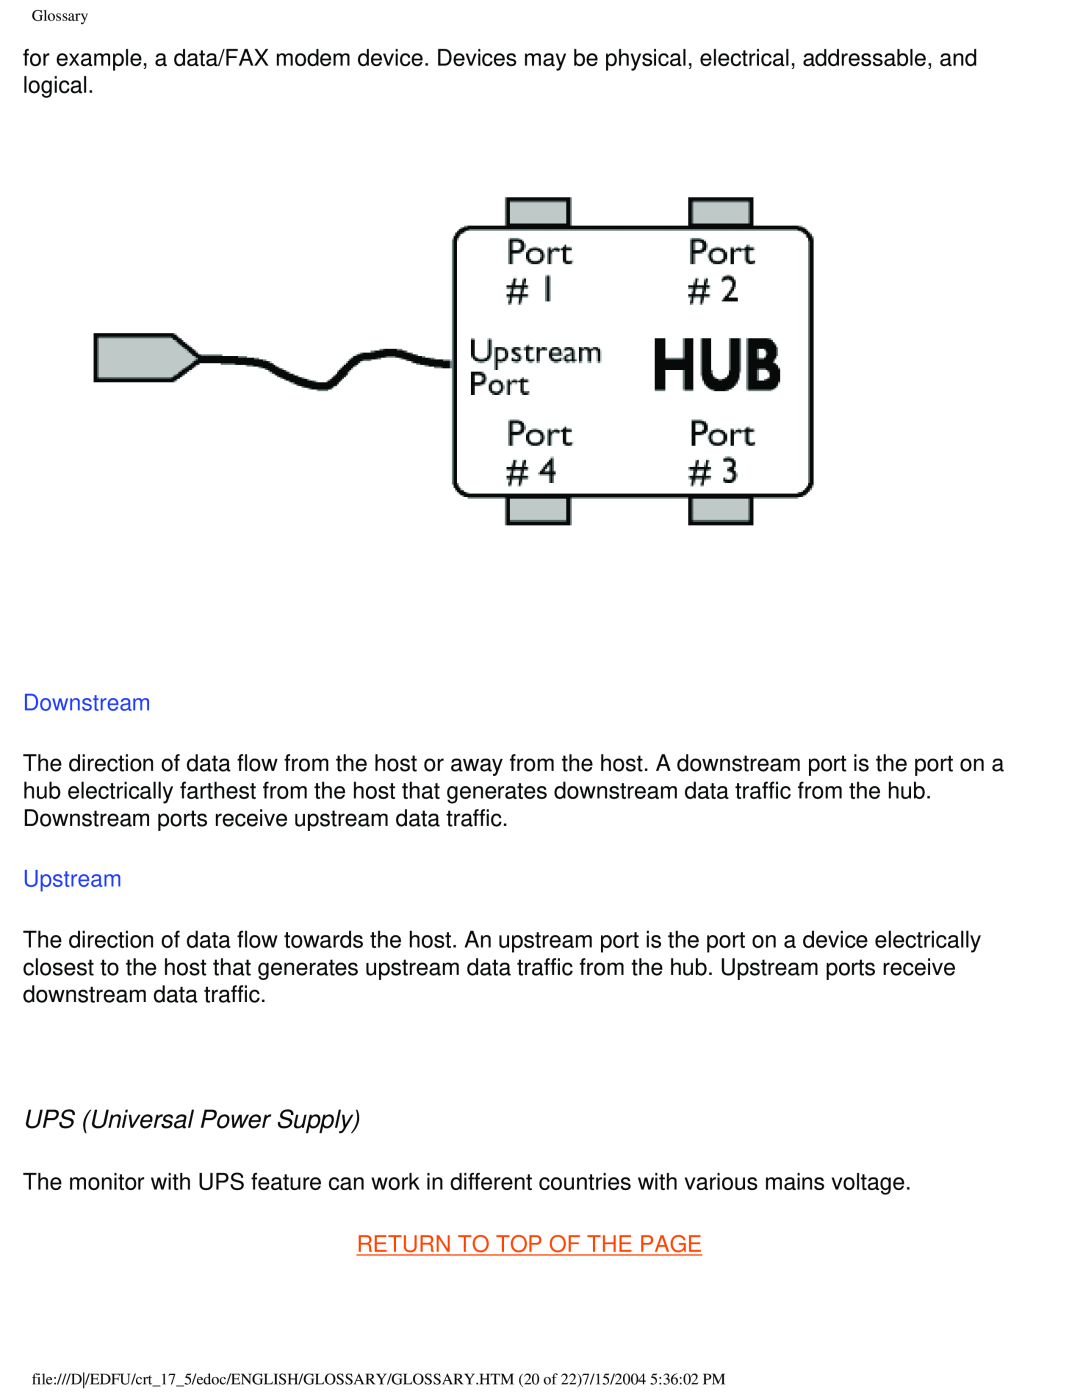 Philips 107G user manual UPS Universal Power Supply, Downstream, Upstream, Return To Top Of The Page 